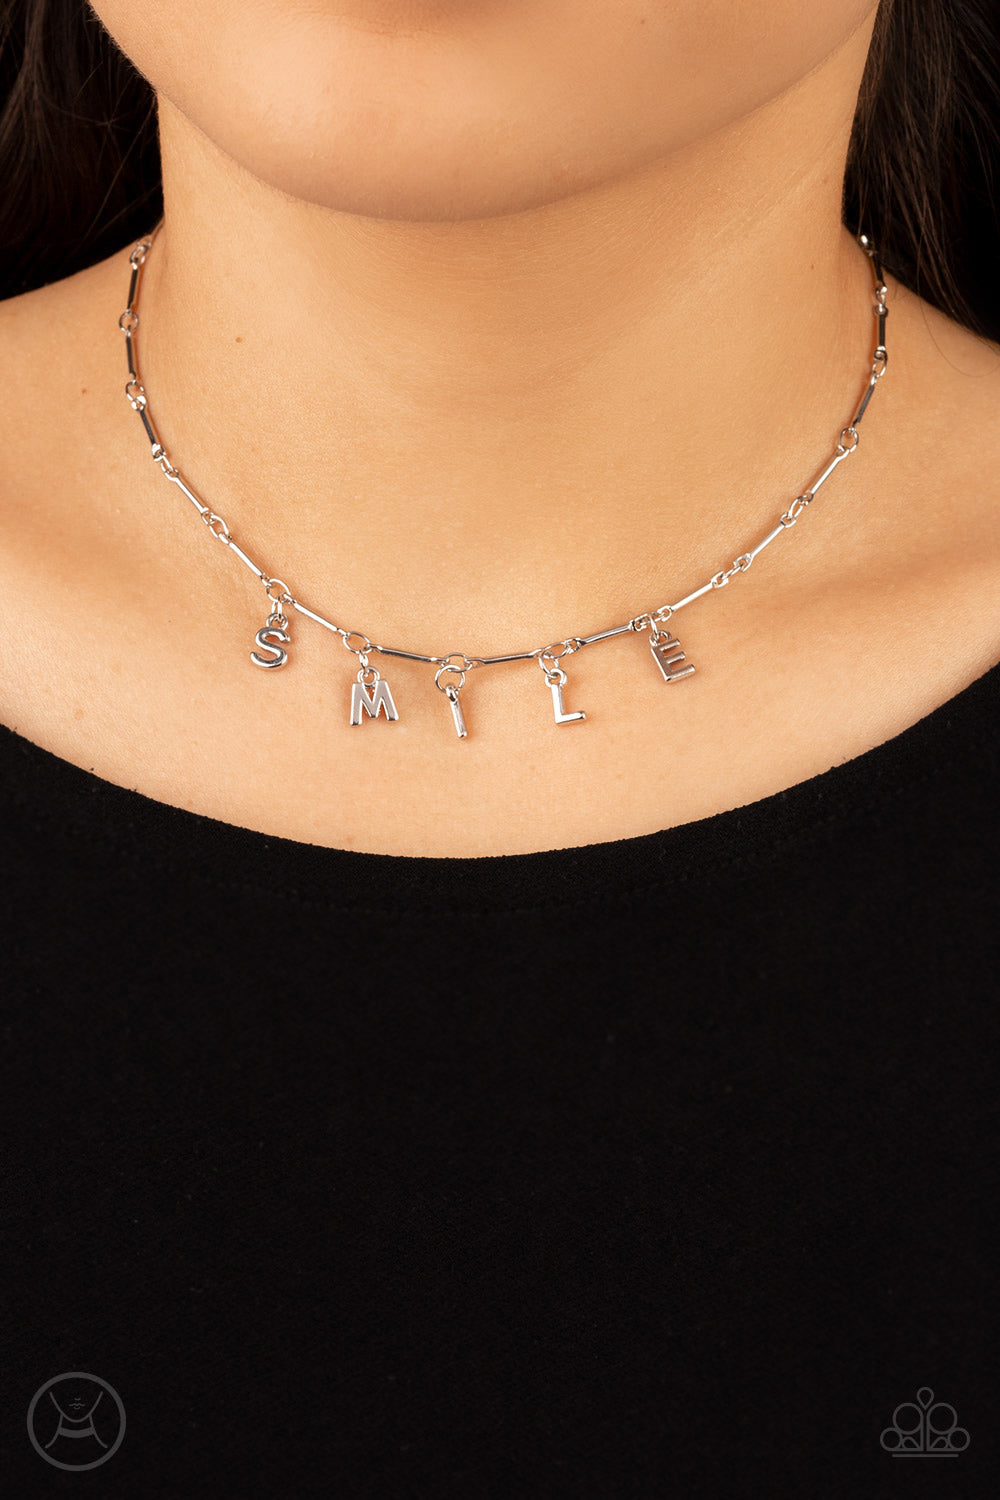 Say My Name - Silver Paparazzi Choker/Necklace